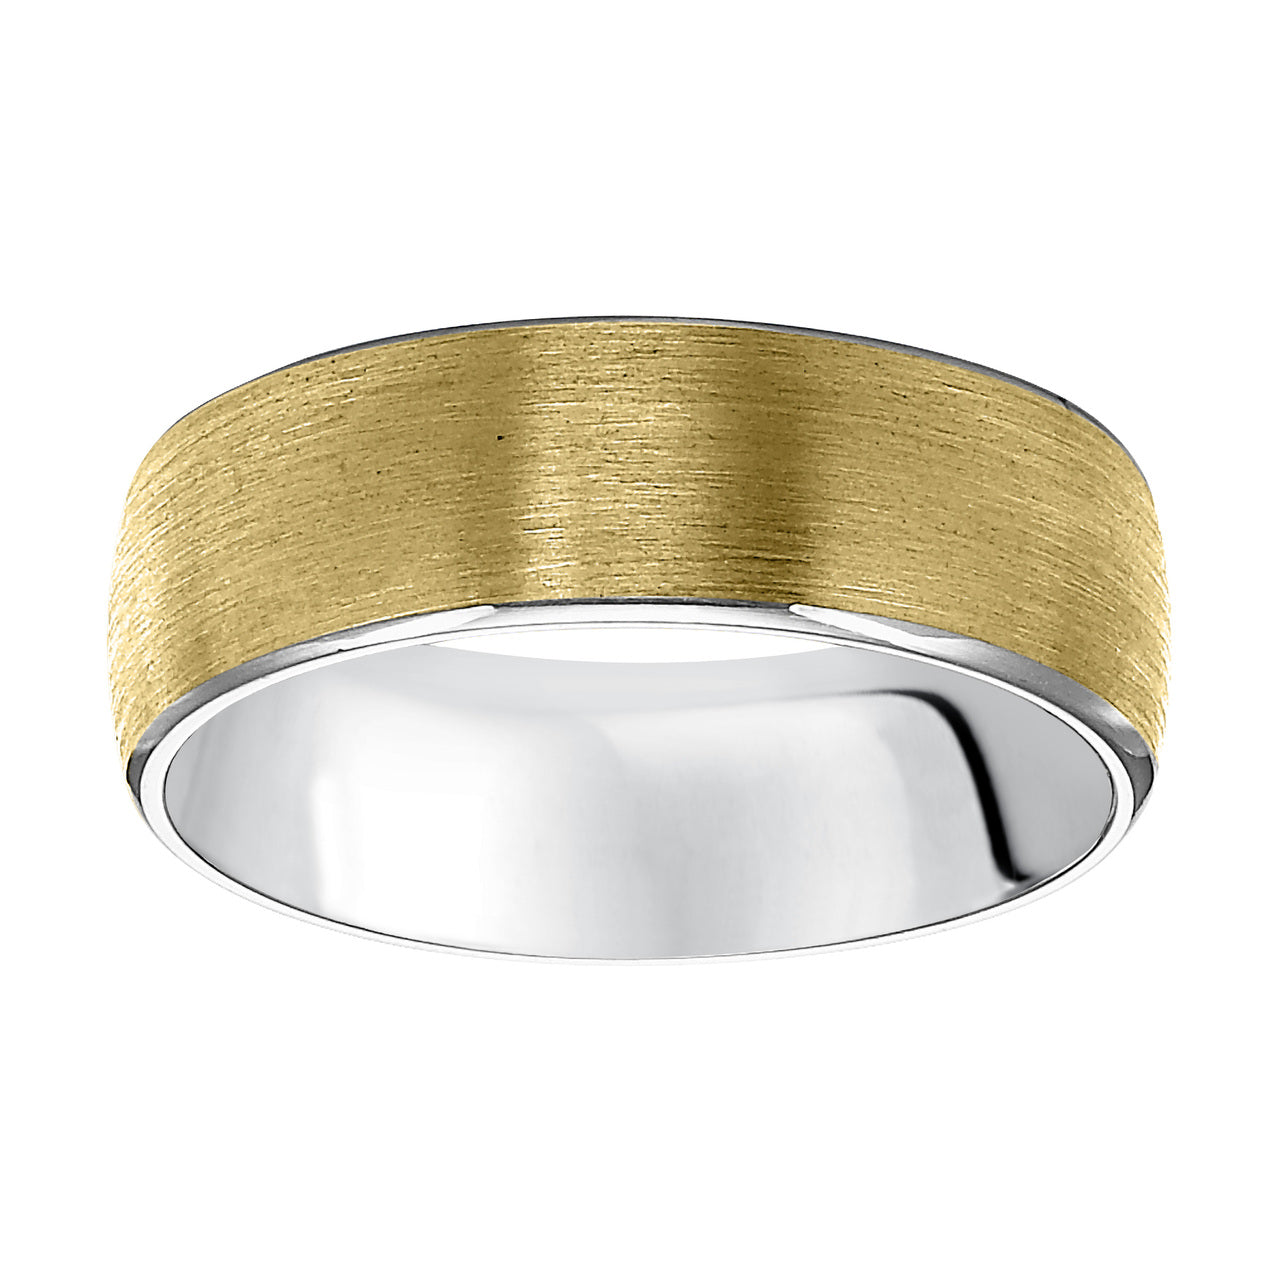 Fink's Men's 7mm Two-Tone Engraved Satin Band